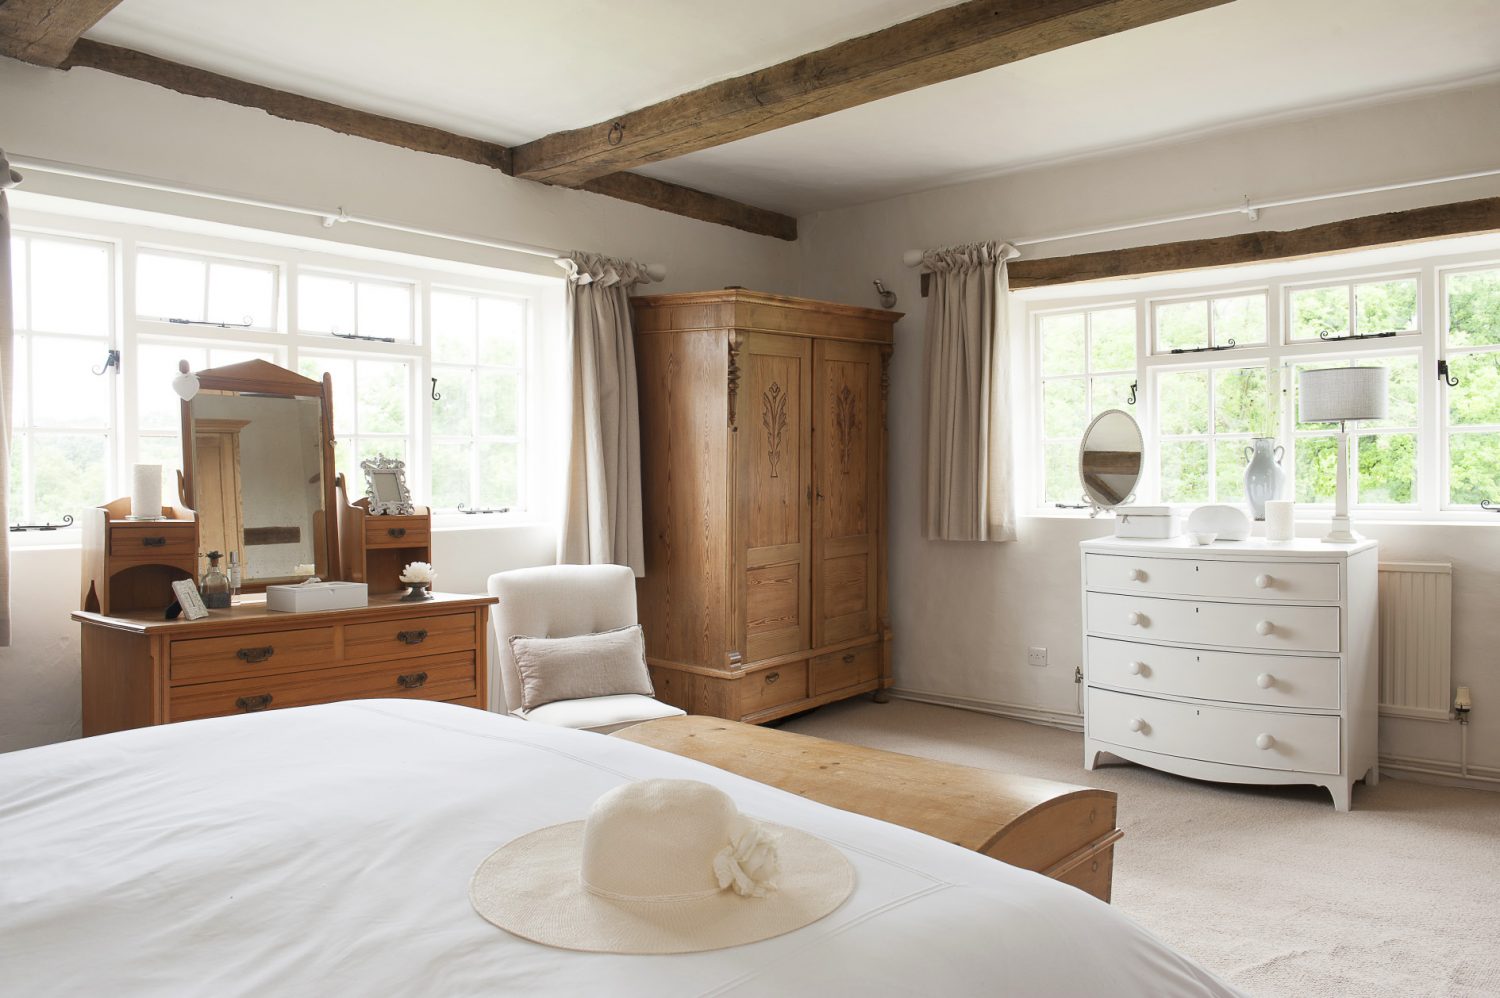 The double-aspect master bedroom looks out over the gardens, which have been a labour of love for Tara and Mark